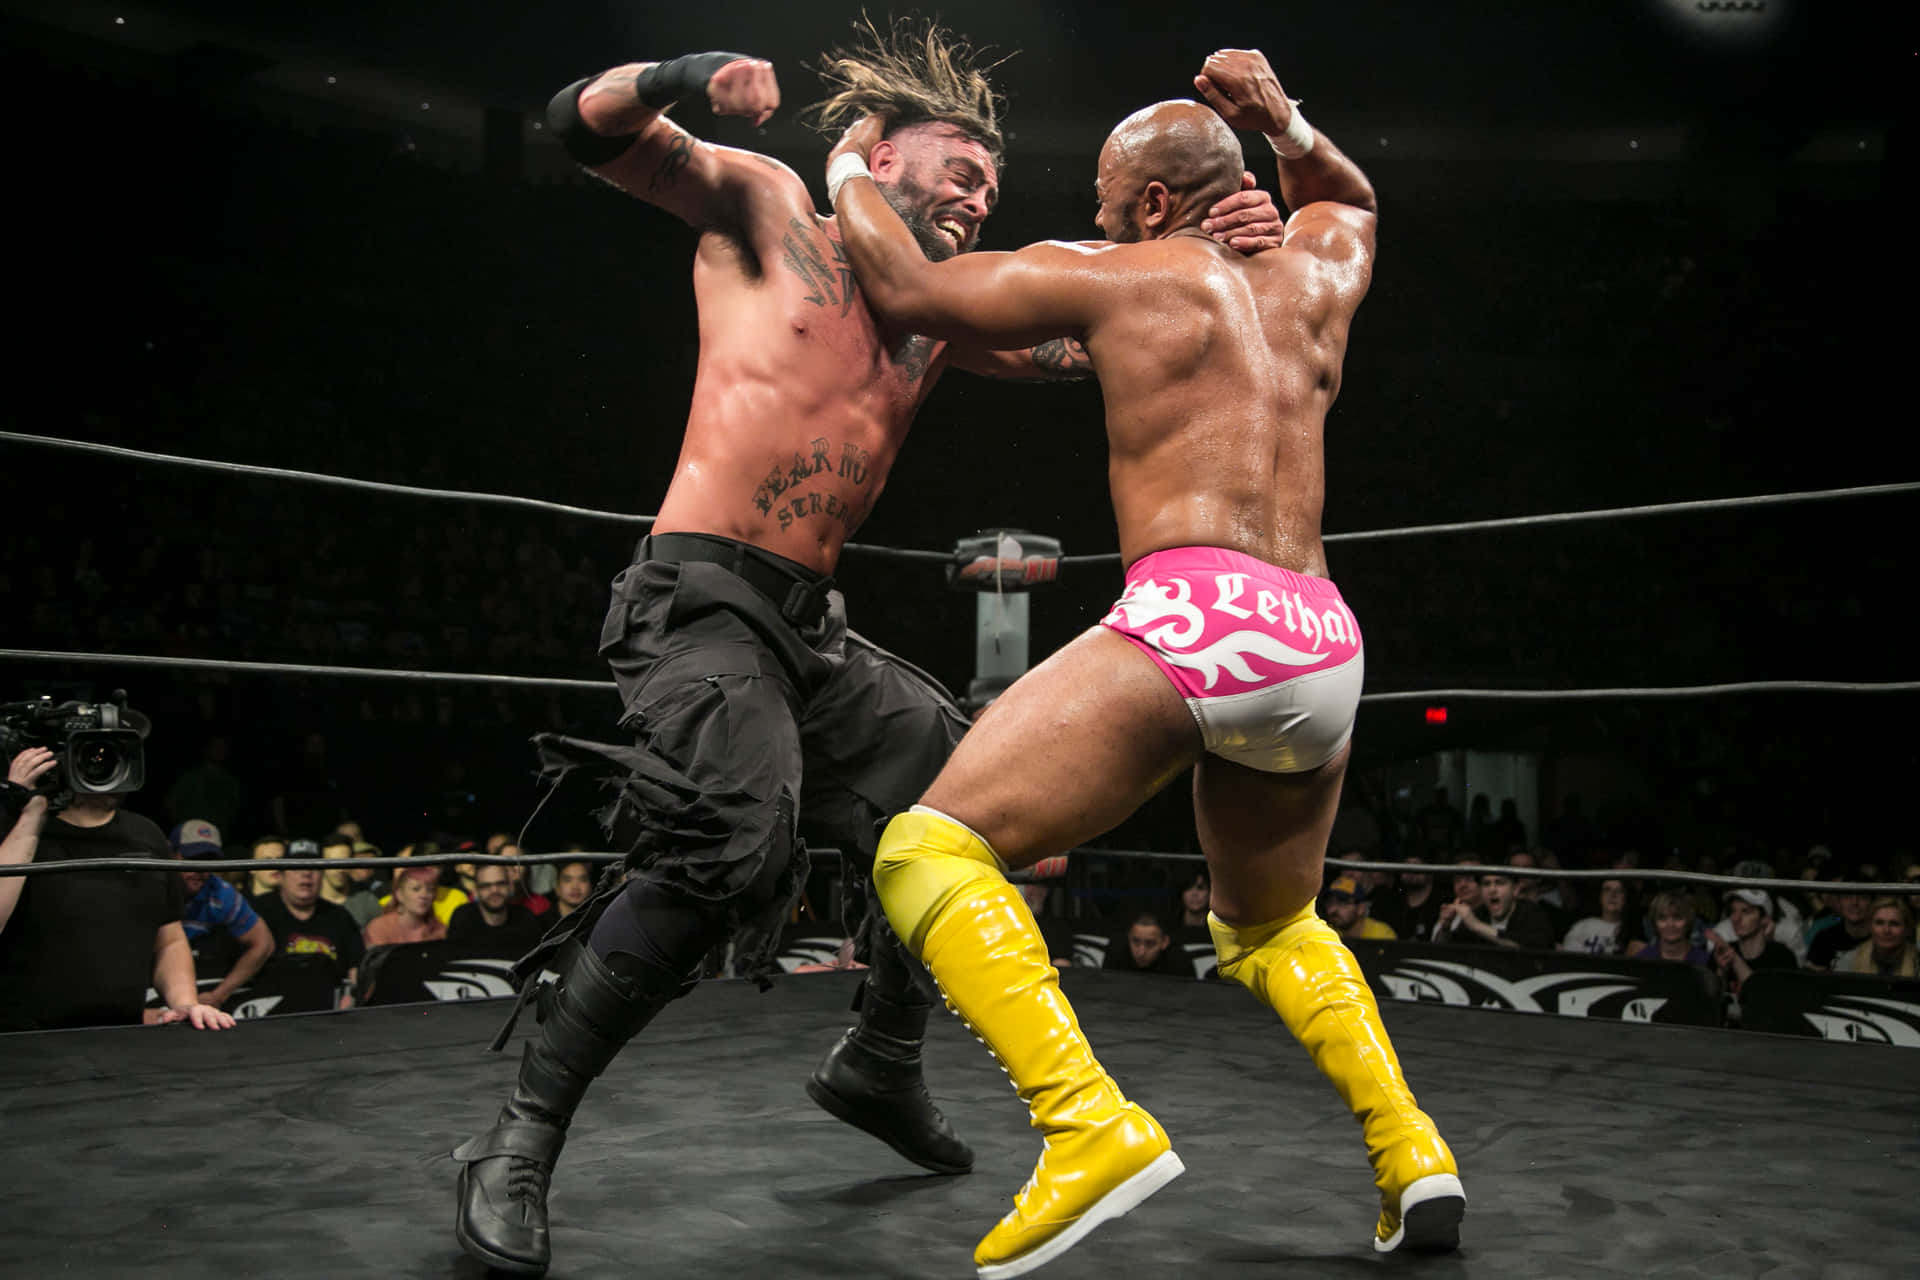 Aew Wrestler Jay Lethal Fight Picture